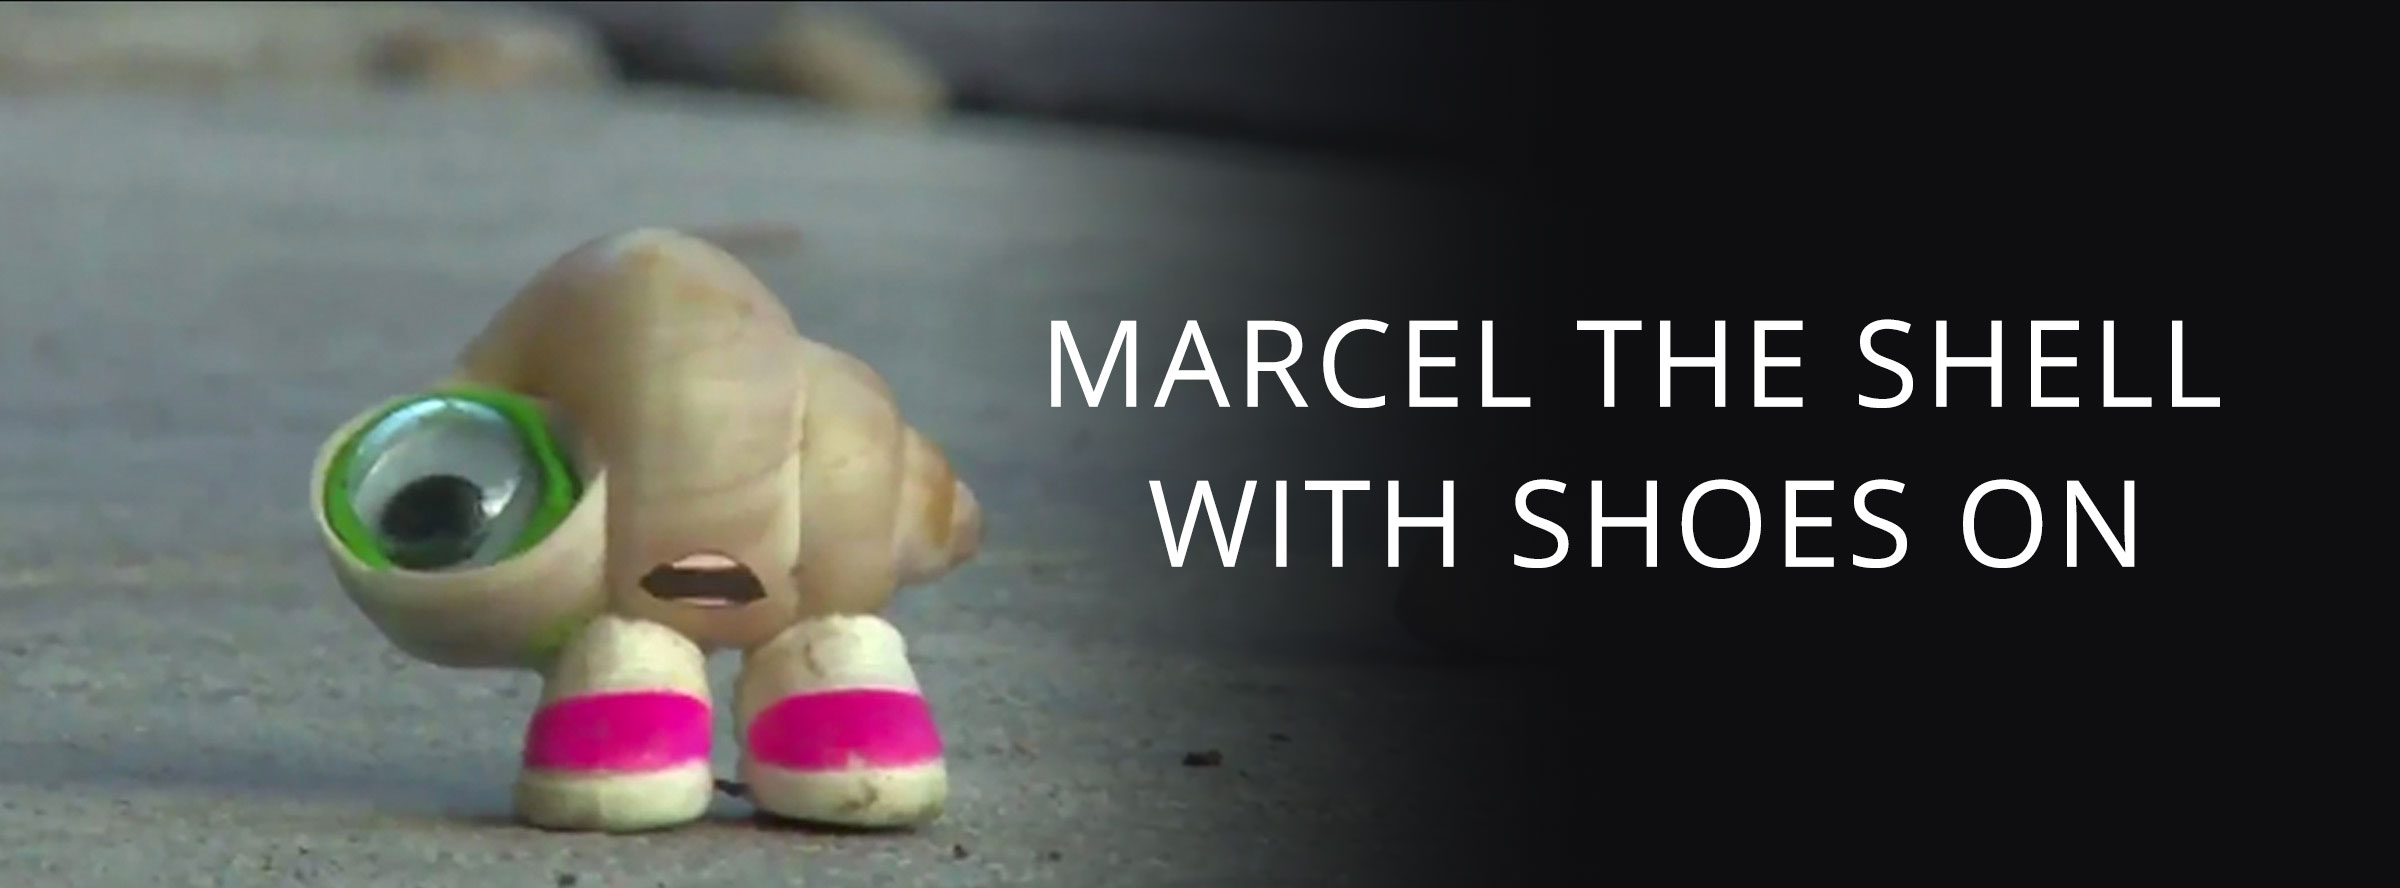 Slider Image for Marcel the Shell with Shoes On (short)